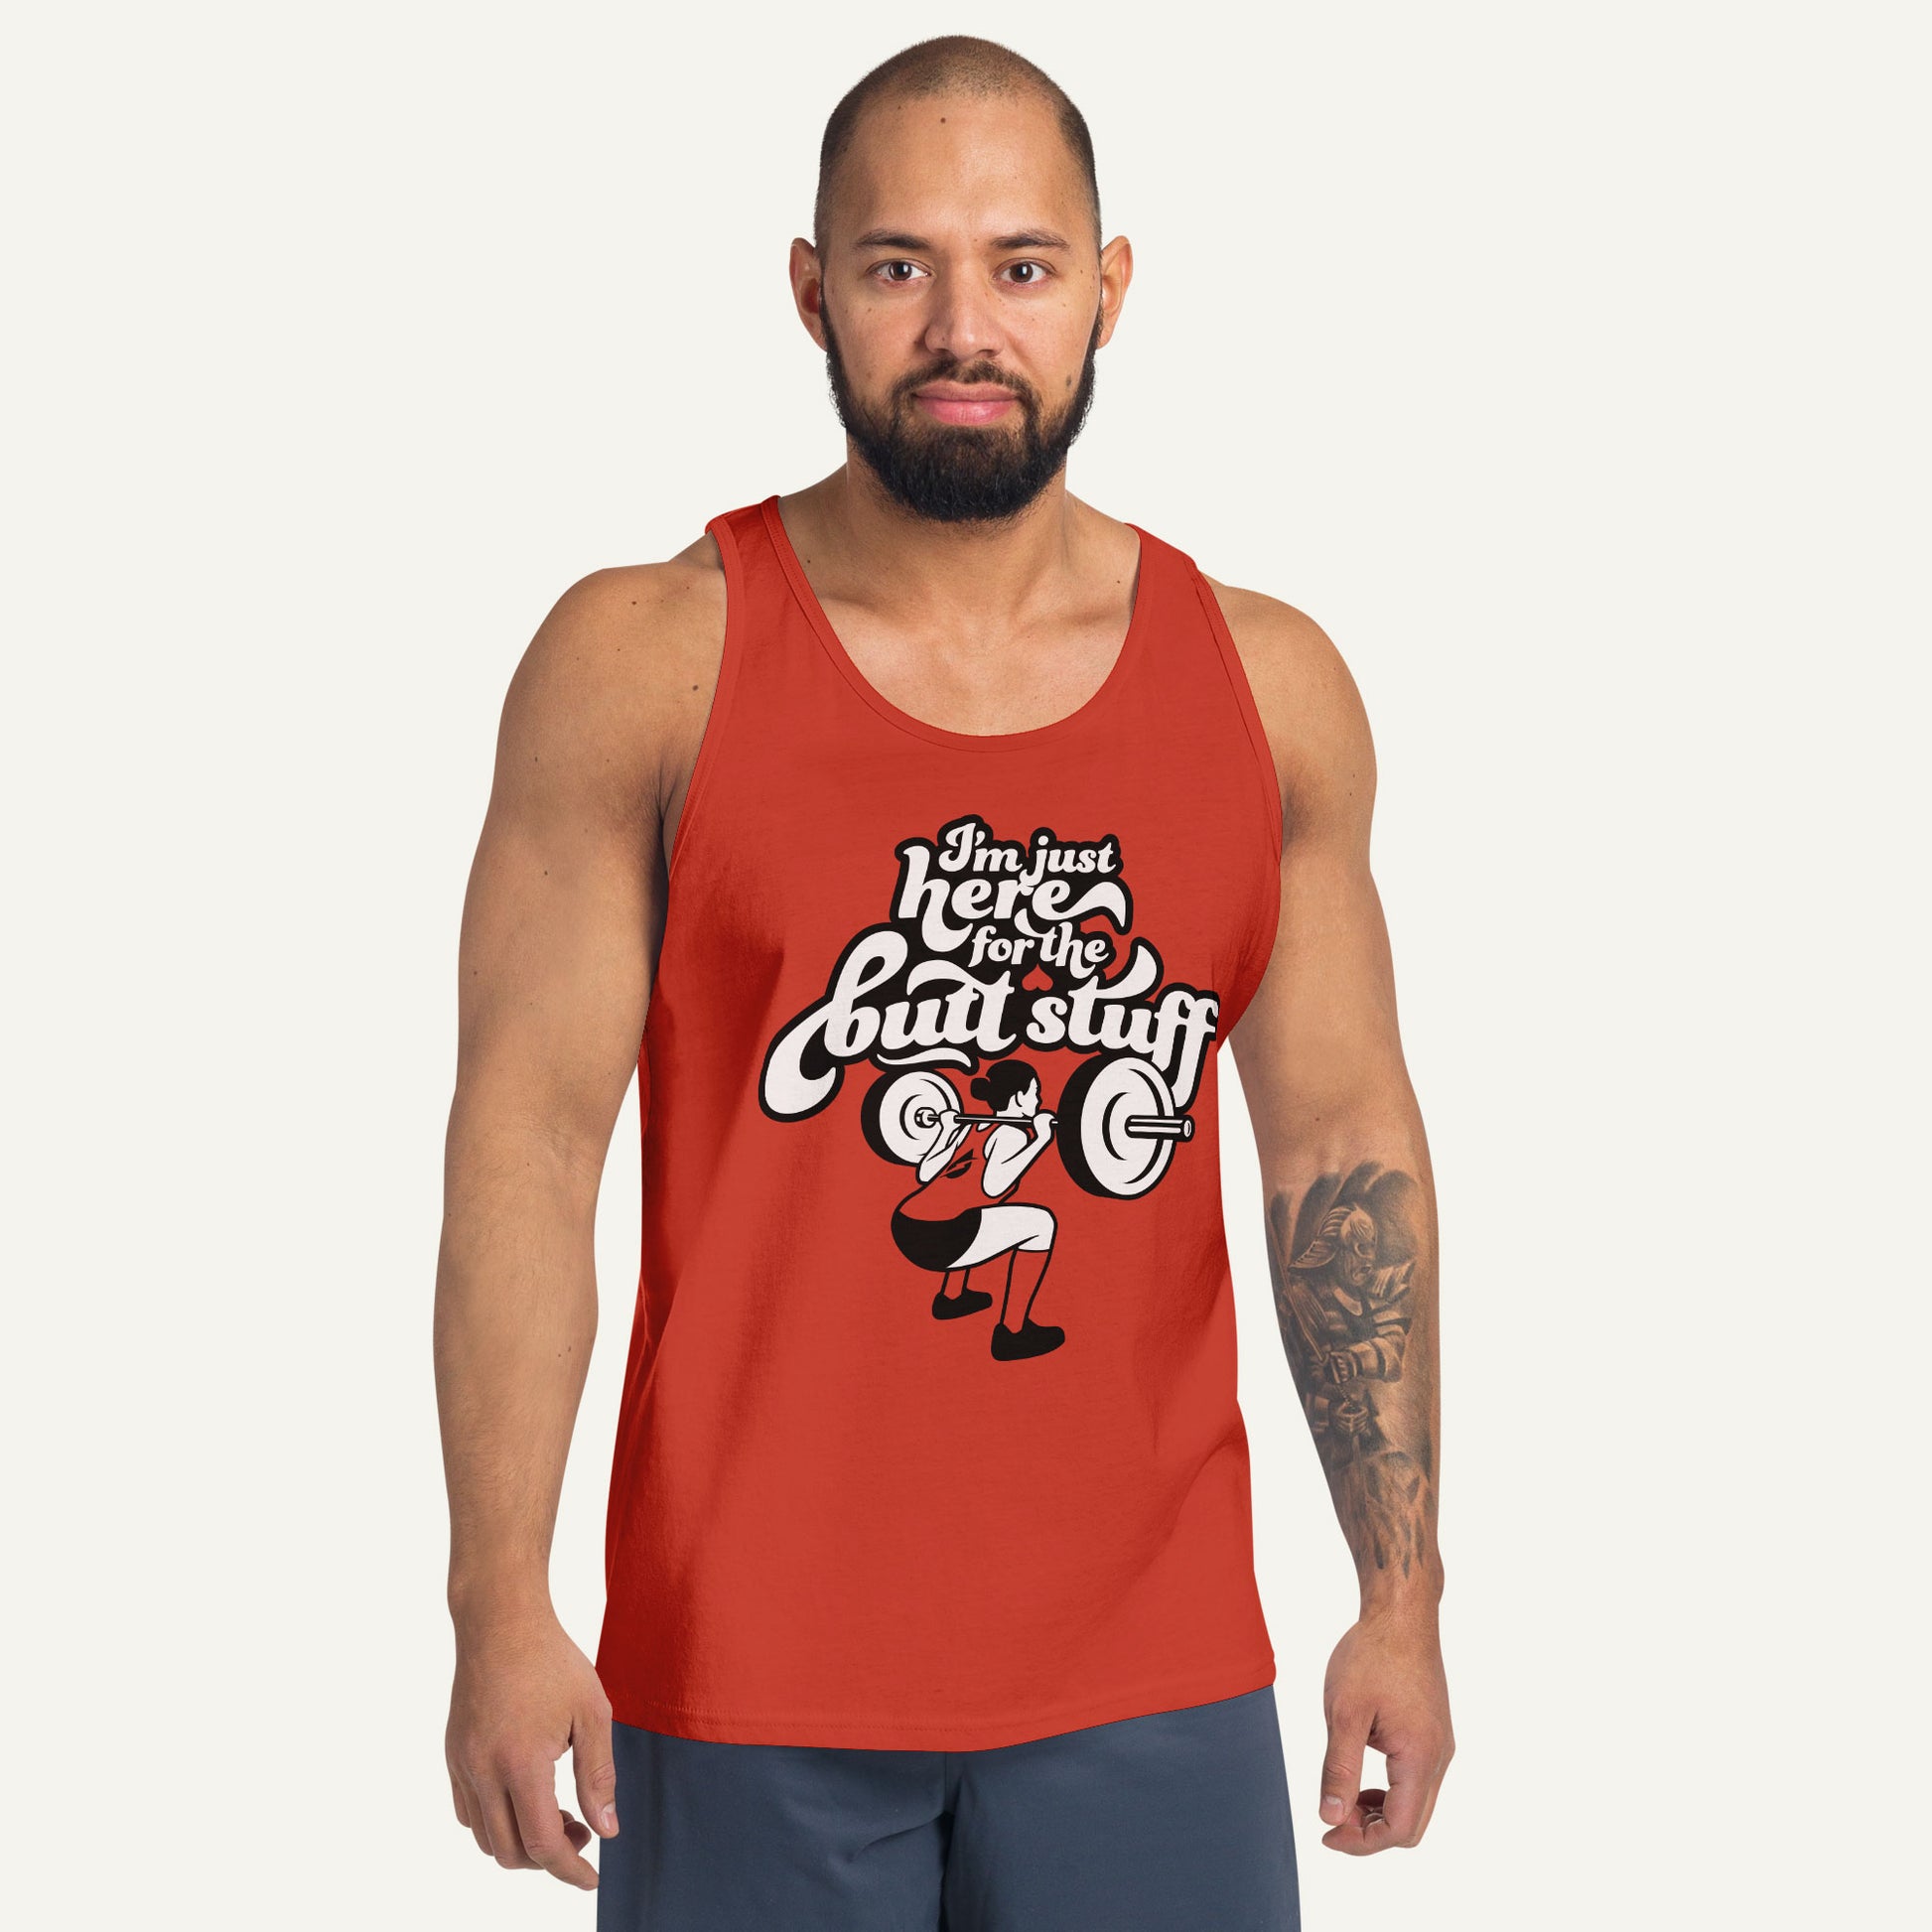 Mens Fitness Tank I Only Do Butt Stuff at The Gym Funny Sarcastic Fitness Workout Tanktop